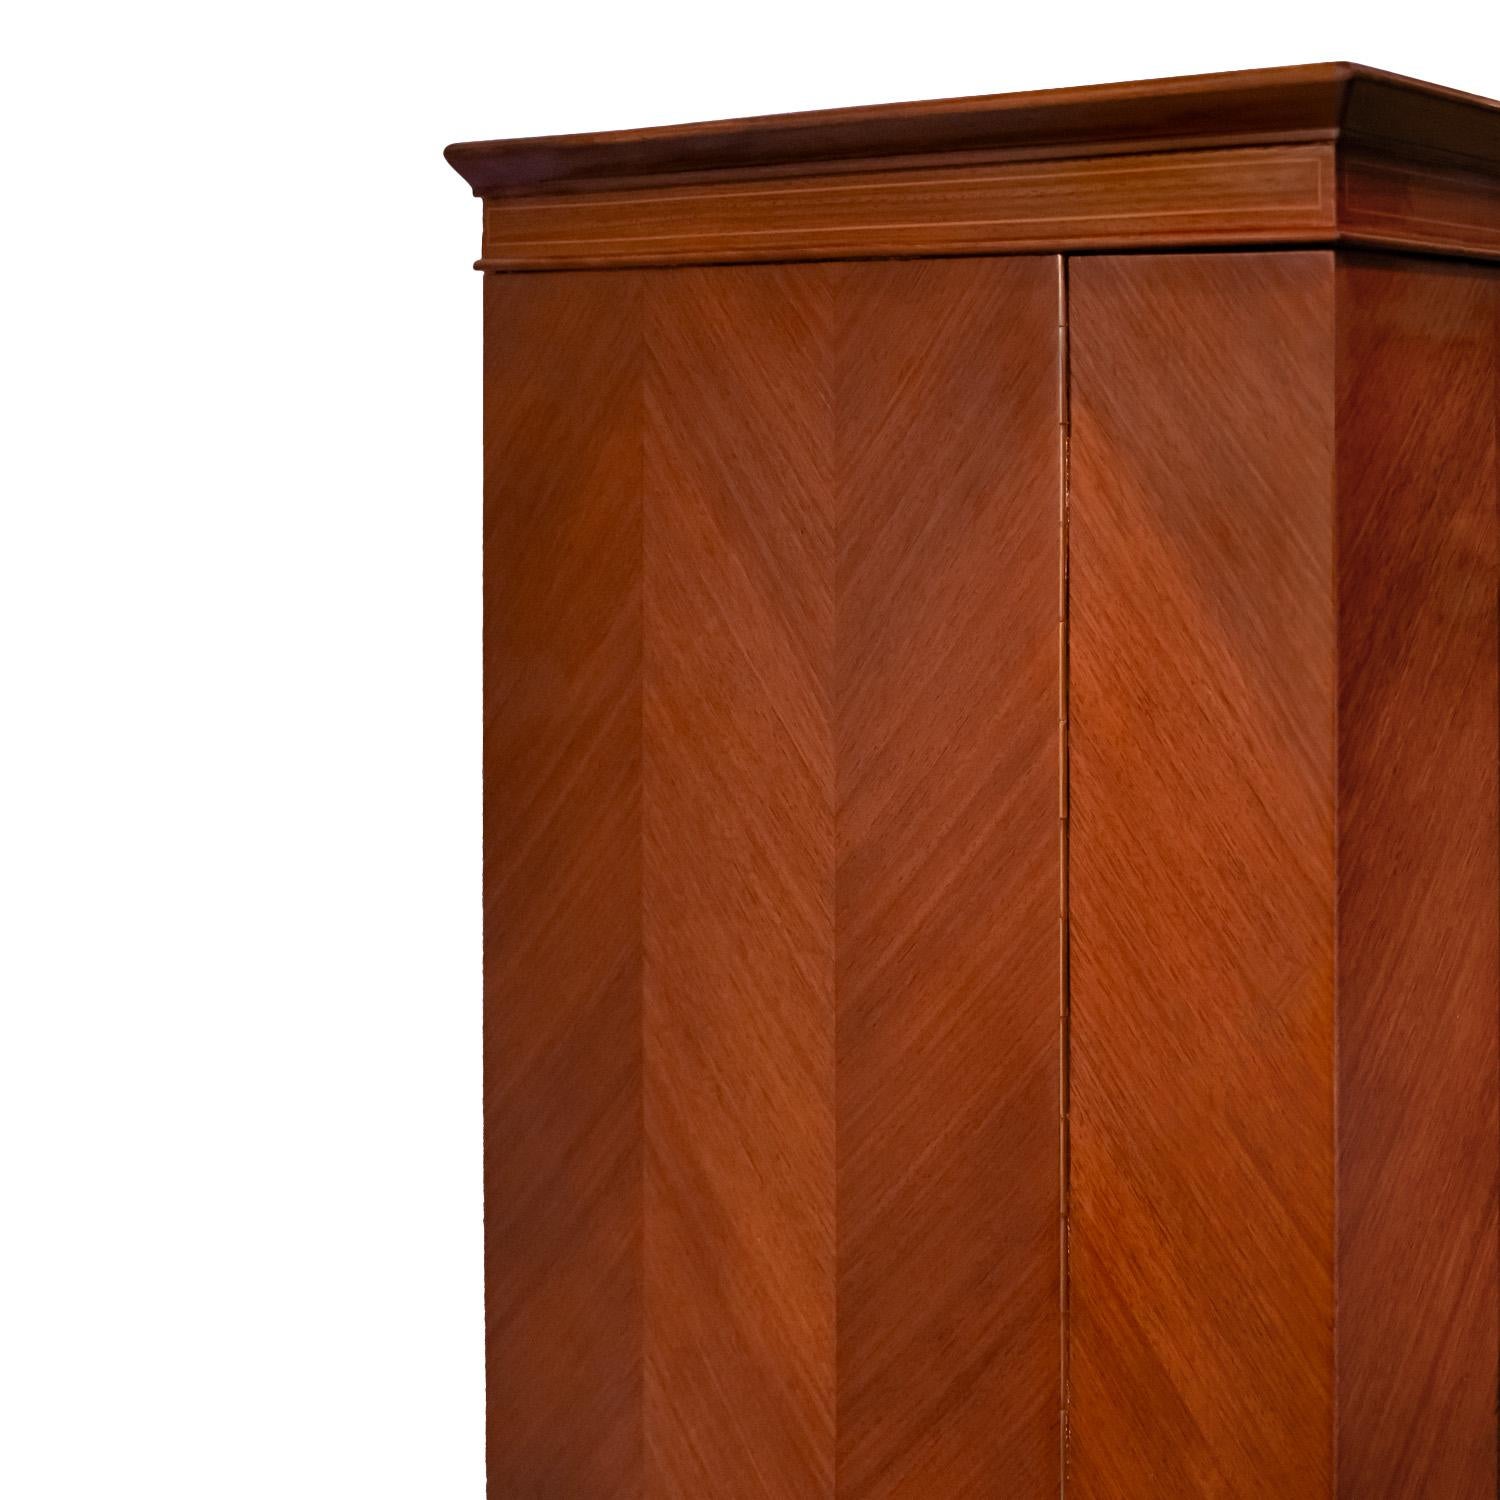 Paolo Buffa Exceptional Liquor Cabinet with Intricate Inlays 1950s In Excellent Condition For Sale In New York, NY